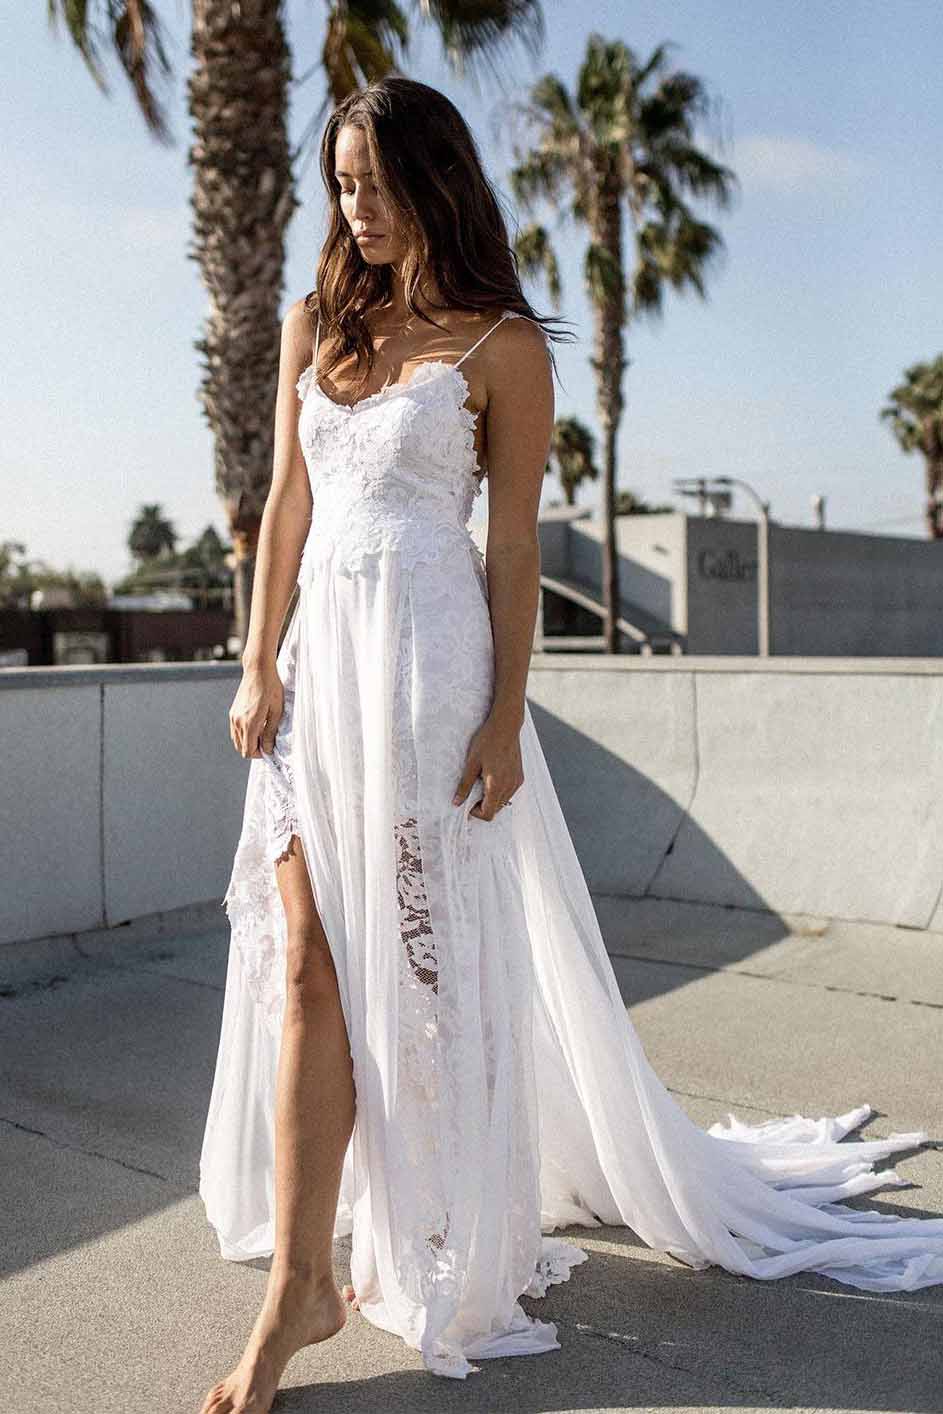 White Beach Dress For Wedding of the decade Learn more here | woodwedding5